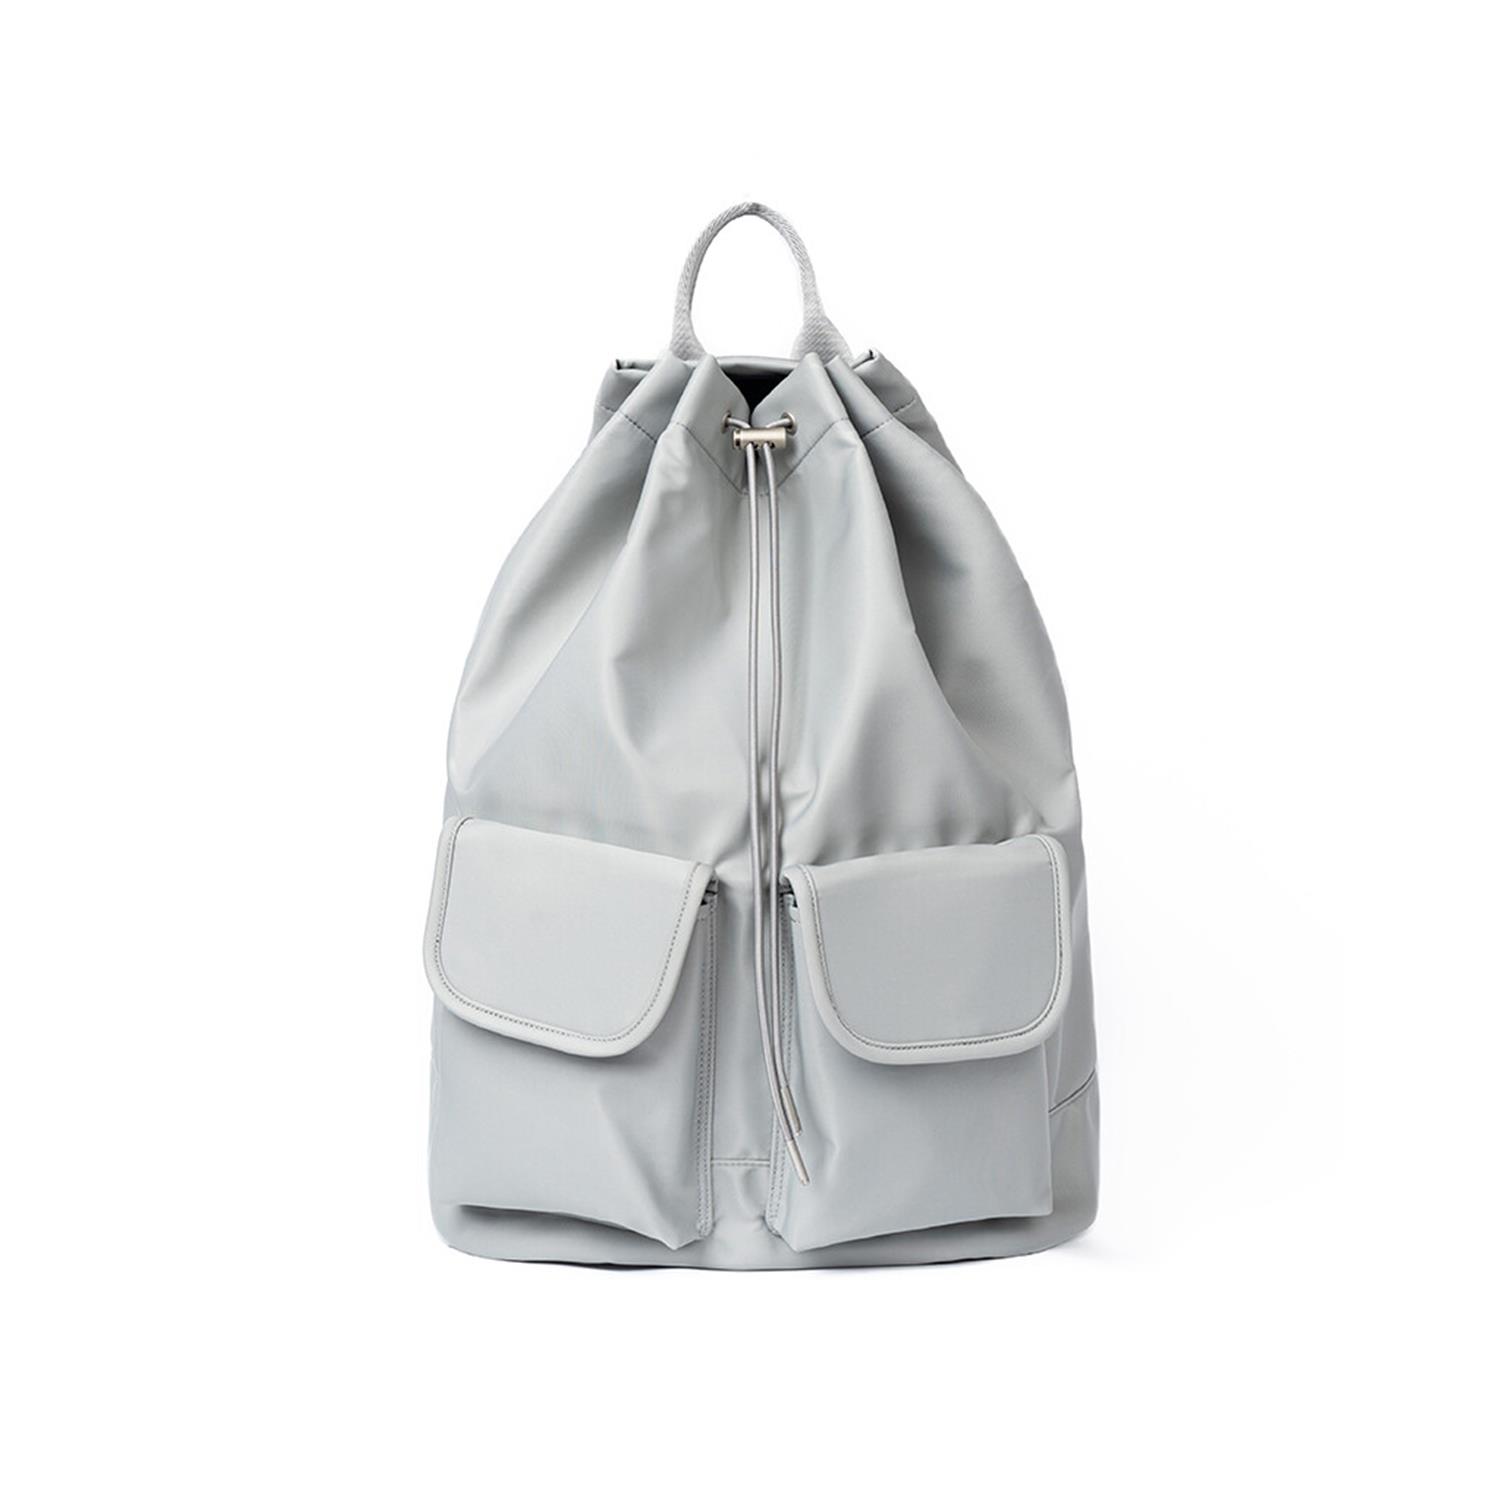 Women’s Three-Way Two-Pocket Drawstring Bag - Silver One Size Hah Archive